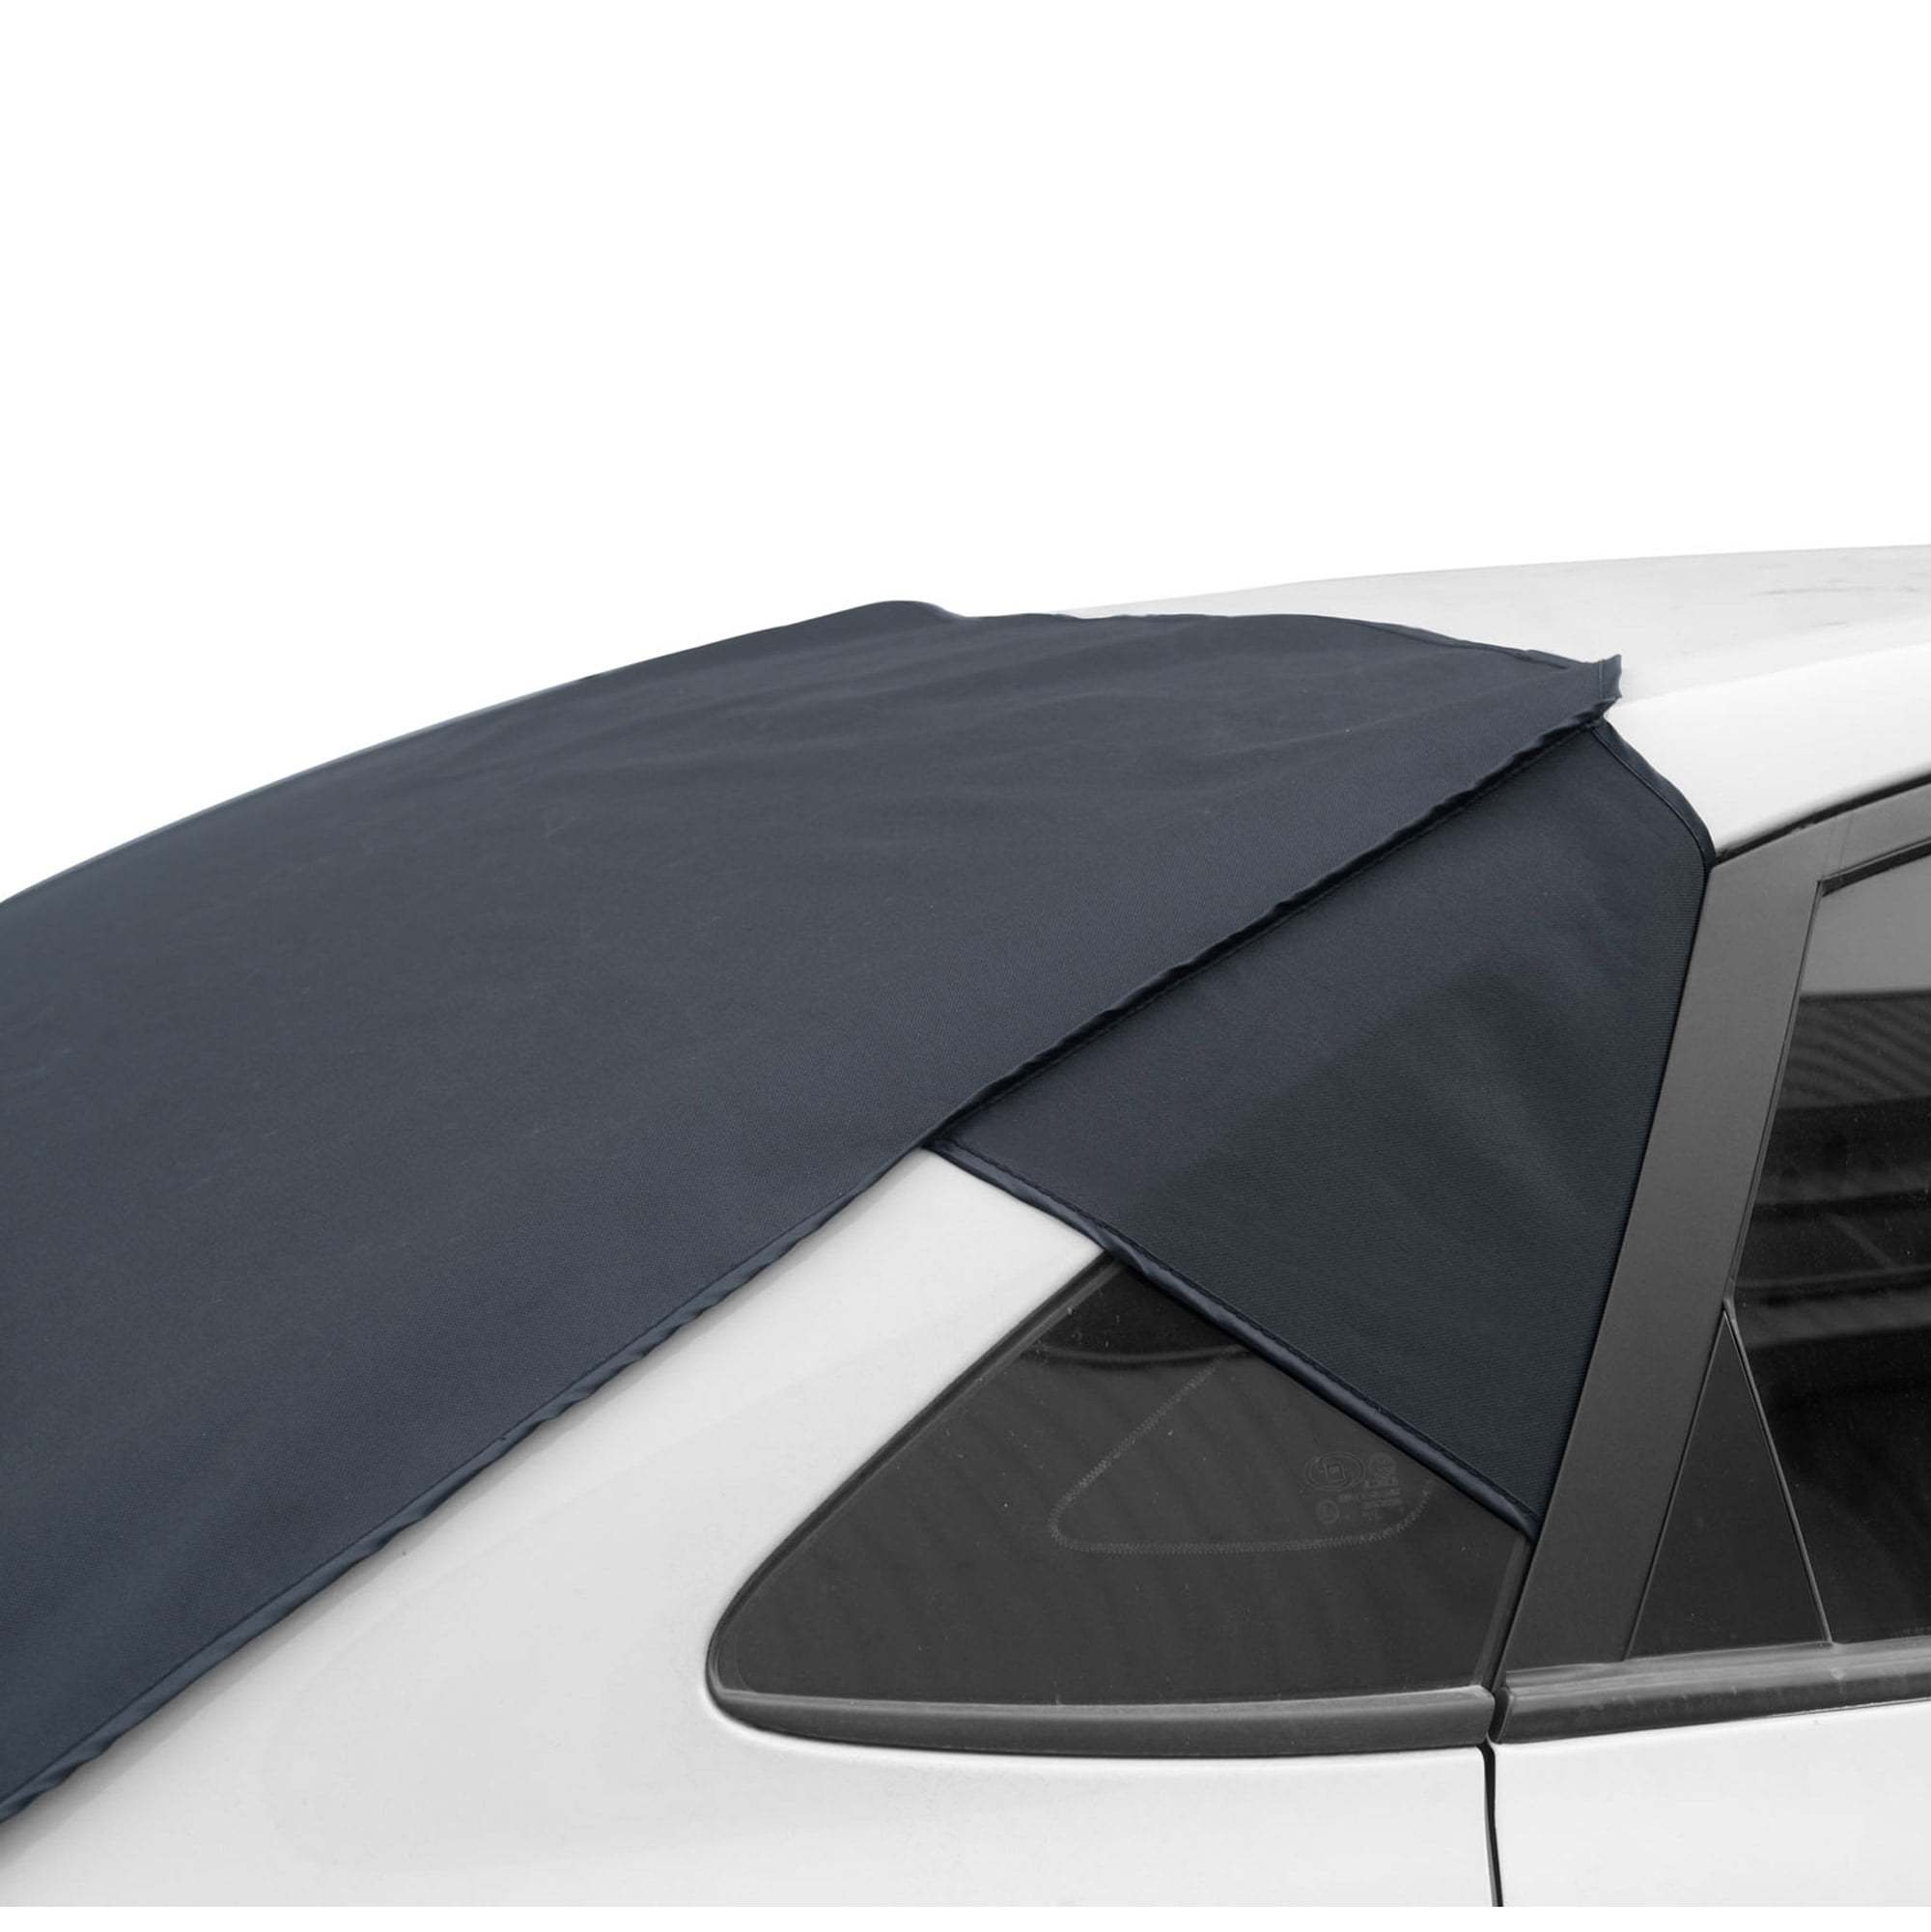 Aousthop Rear Windshield Snow Cover, Black Winter Snow Shield Car Window,  All Weather Car Cover 